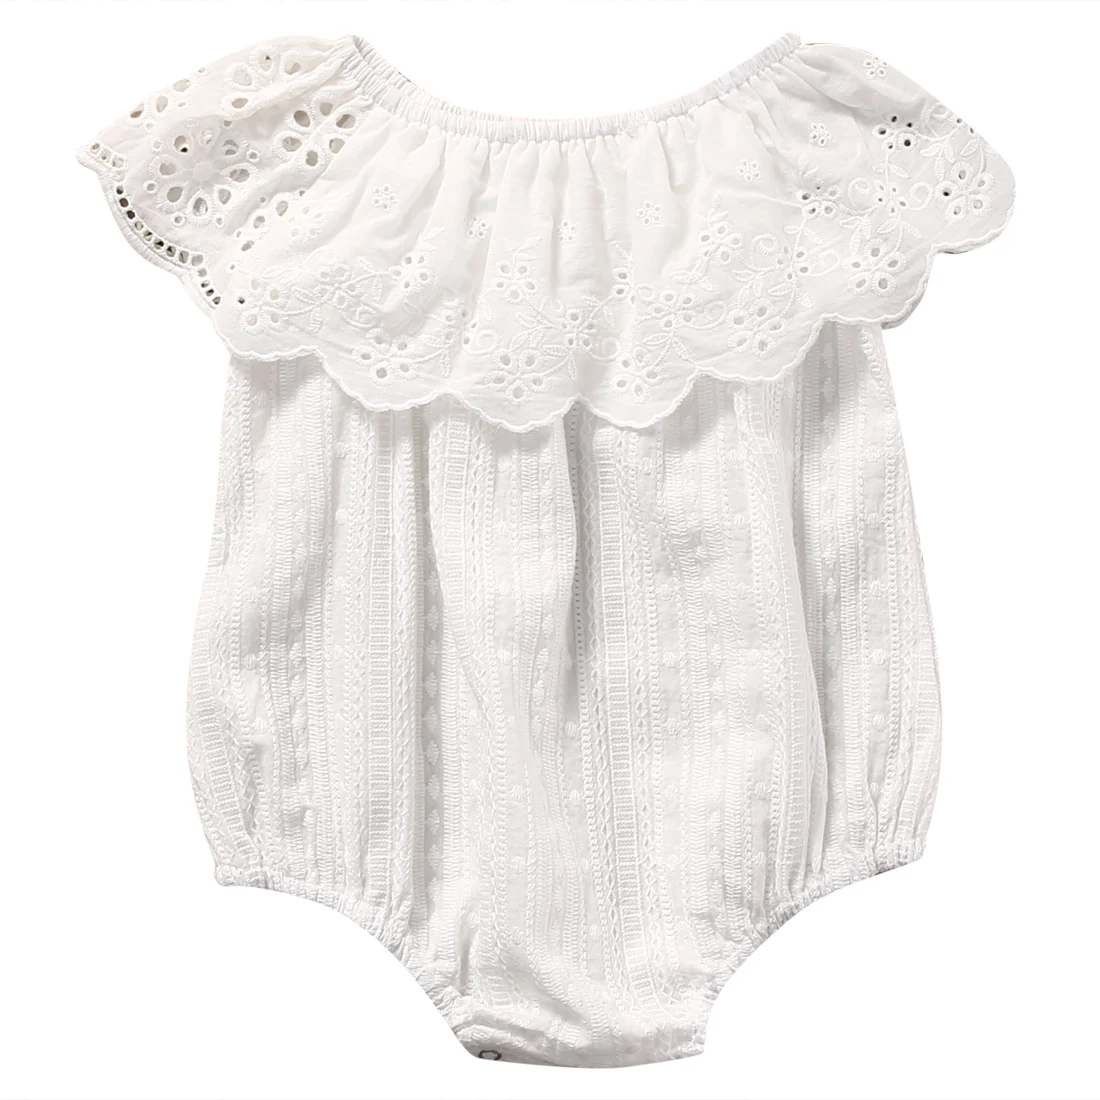 

2018 New Cute Newborn Baby Girl Romper Clothes White Lace Playsuit Jumpsuit Outfit Summer Bebes Sunsuit 0-24M